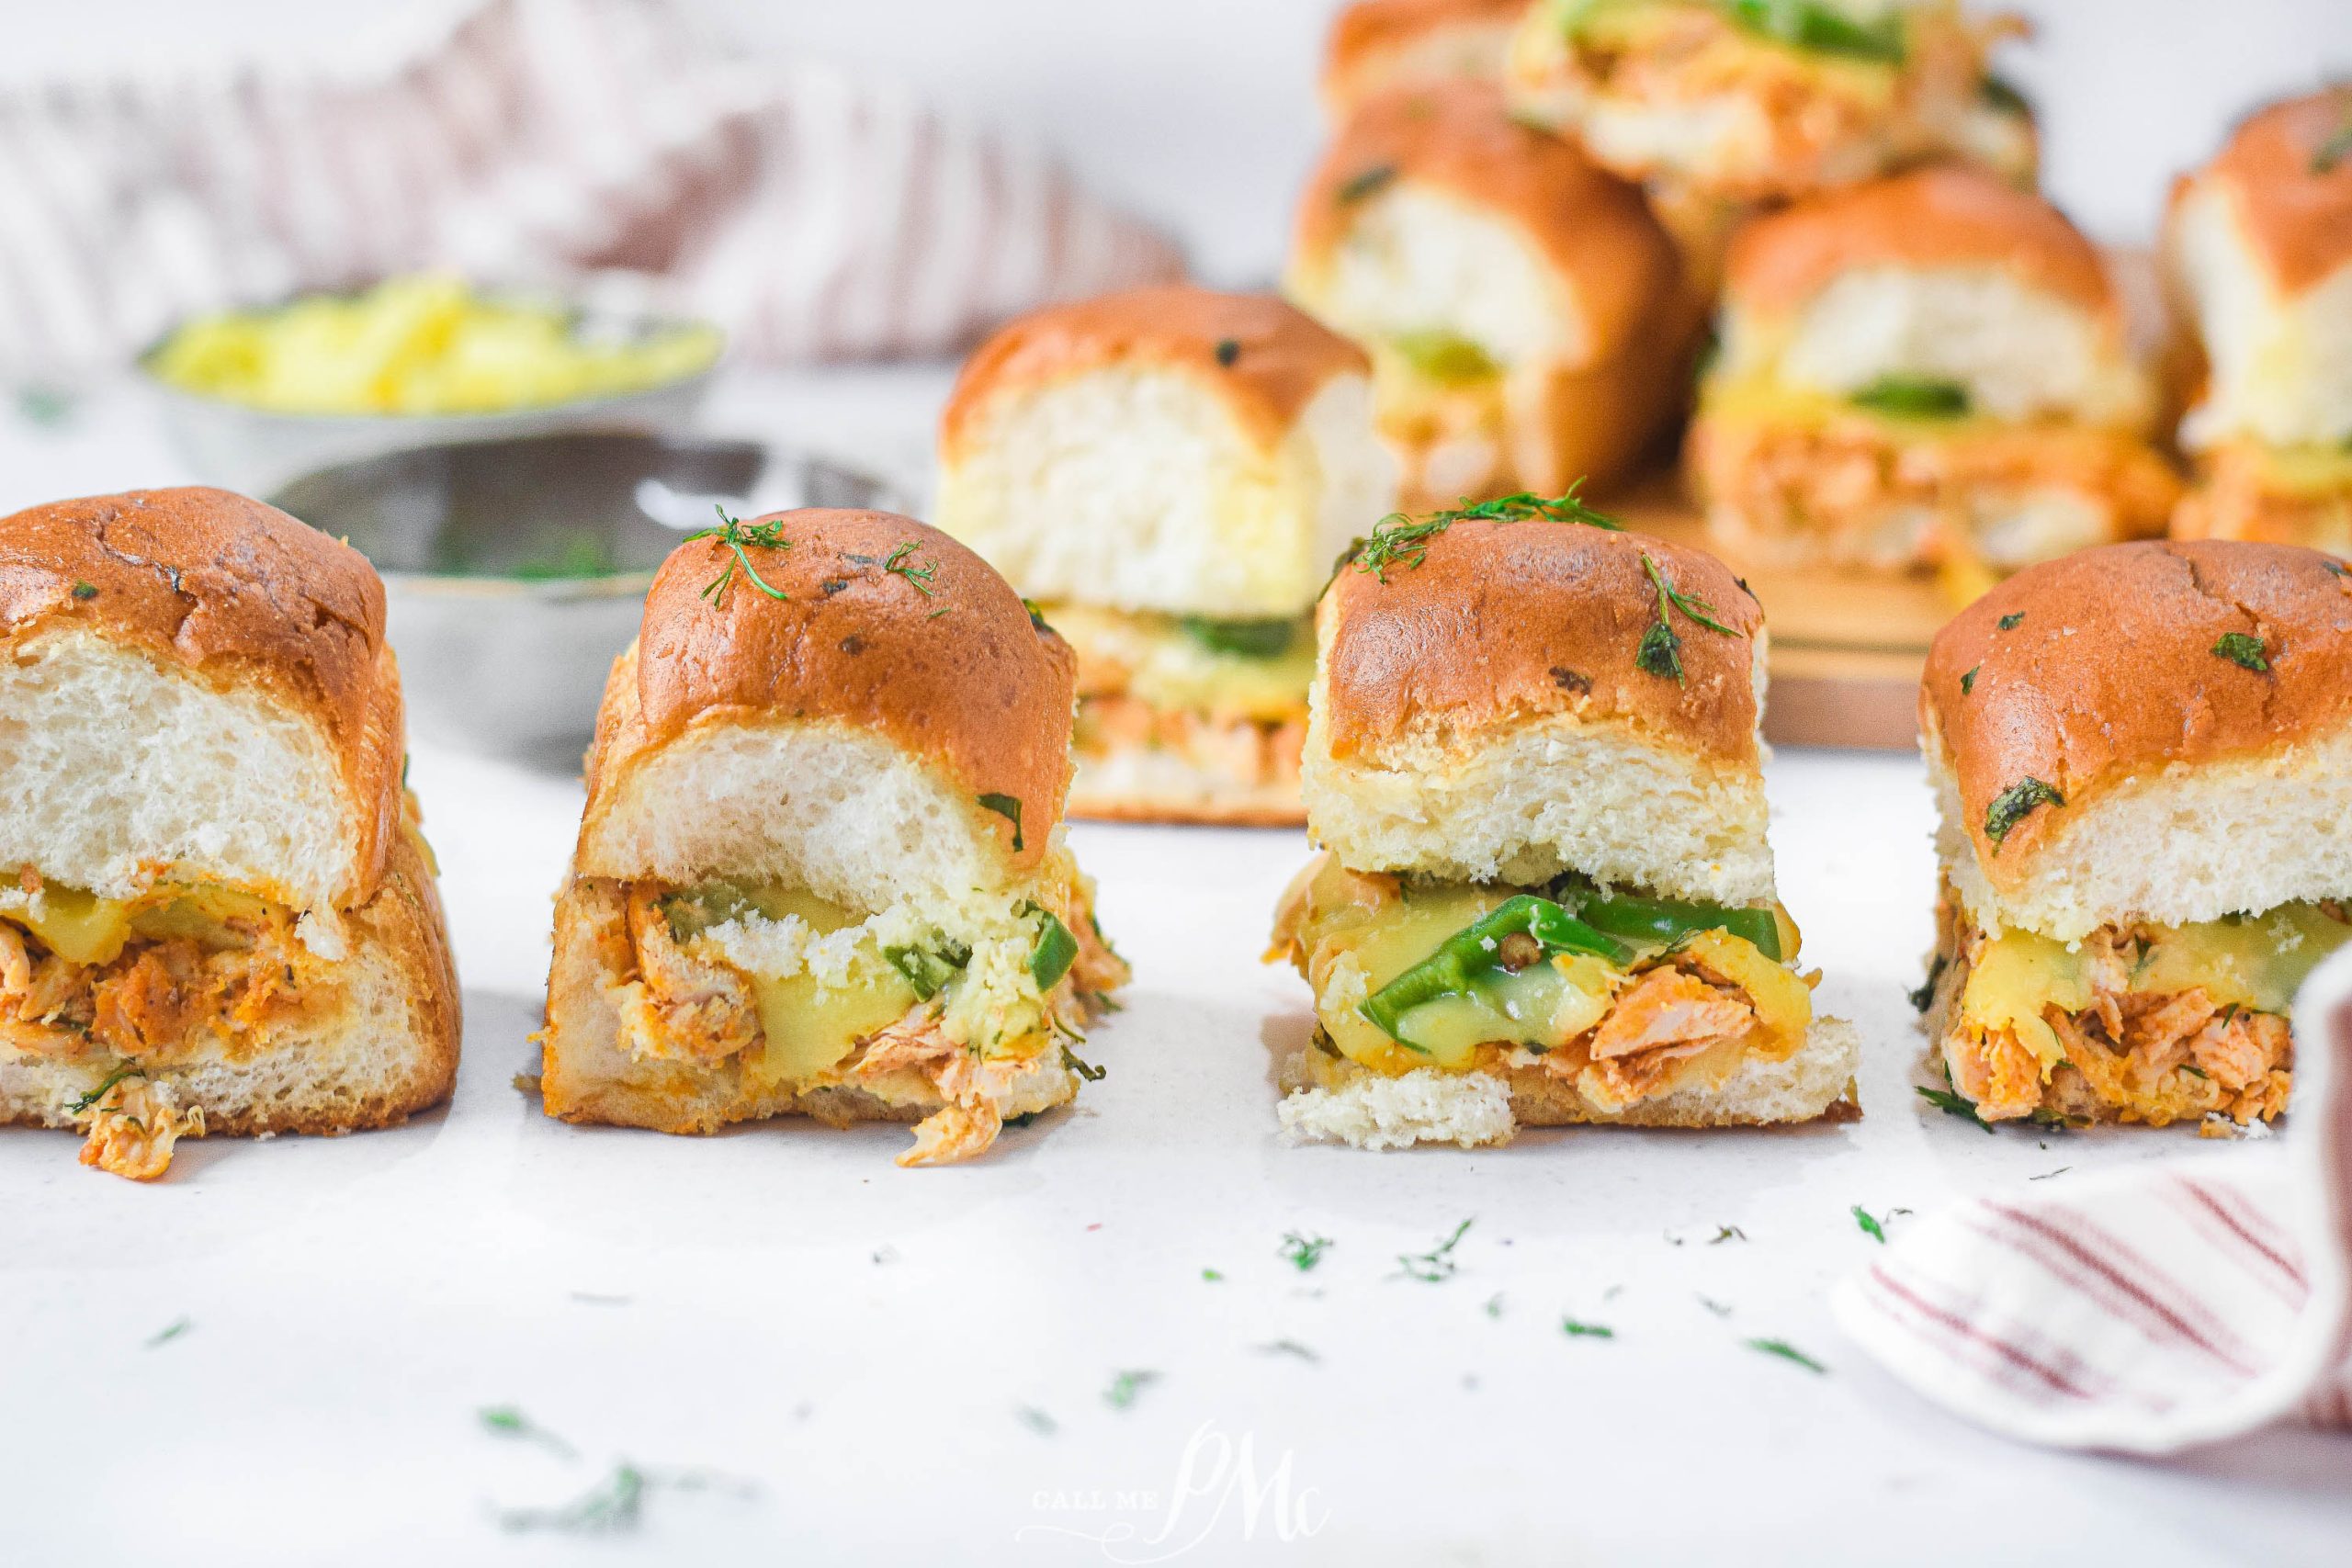 Small chicken sandwiches with cheese on a table.